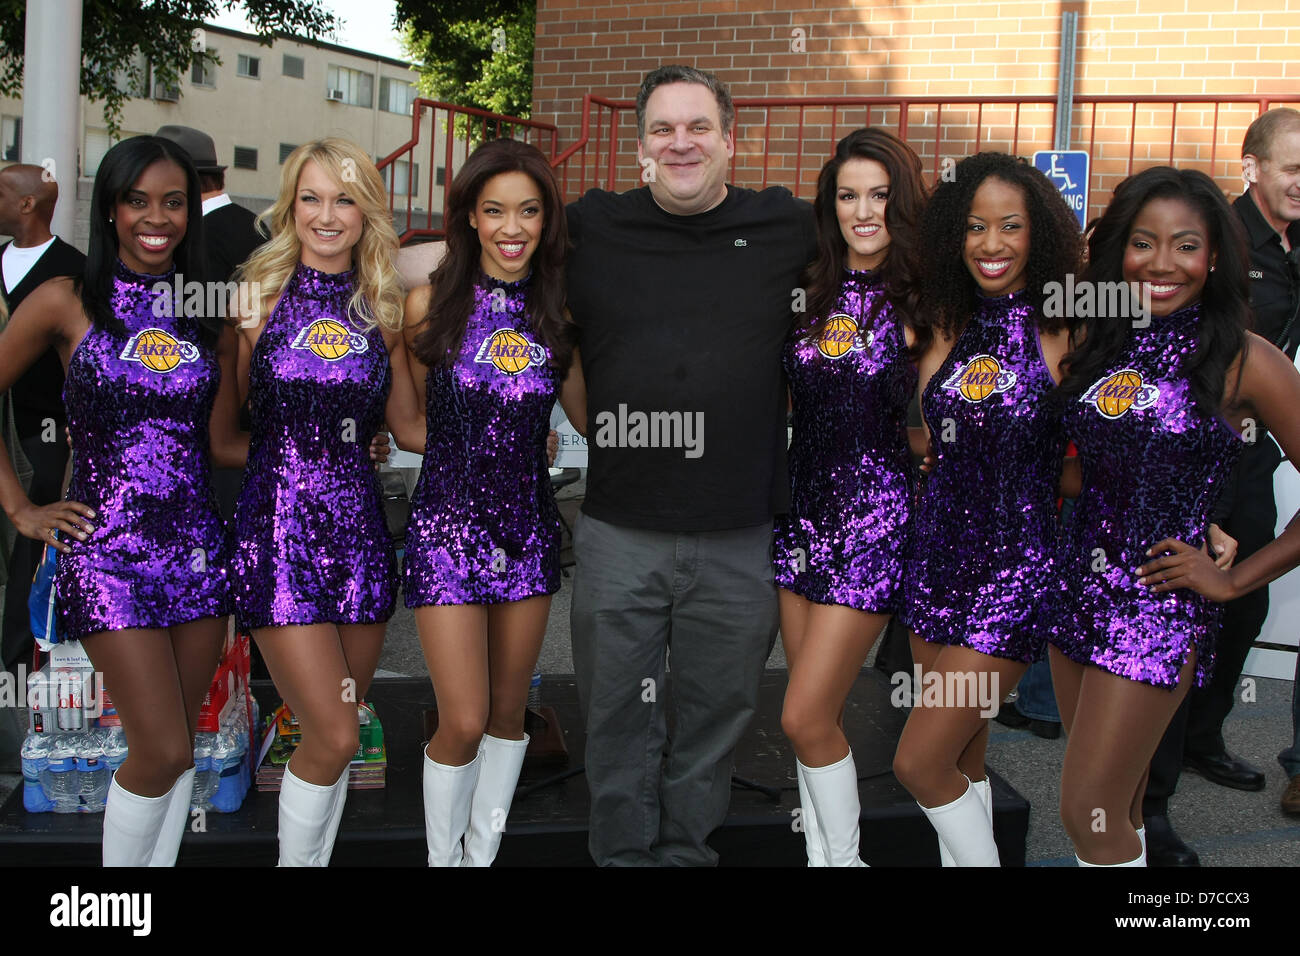 Jeff Garlin and the Laker Girls Chamber Of Commerce 17th Annual Police And Fire BBQ held at the Hollywood LAPD and Fire Stock Photo